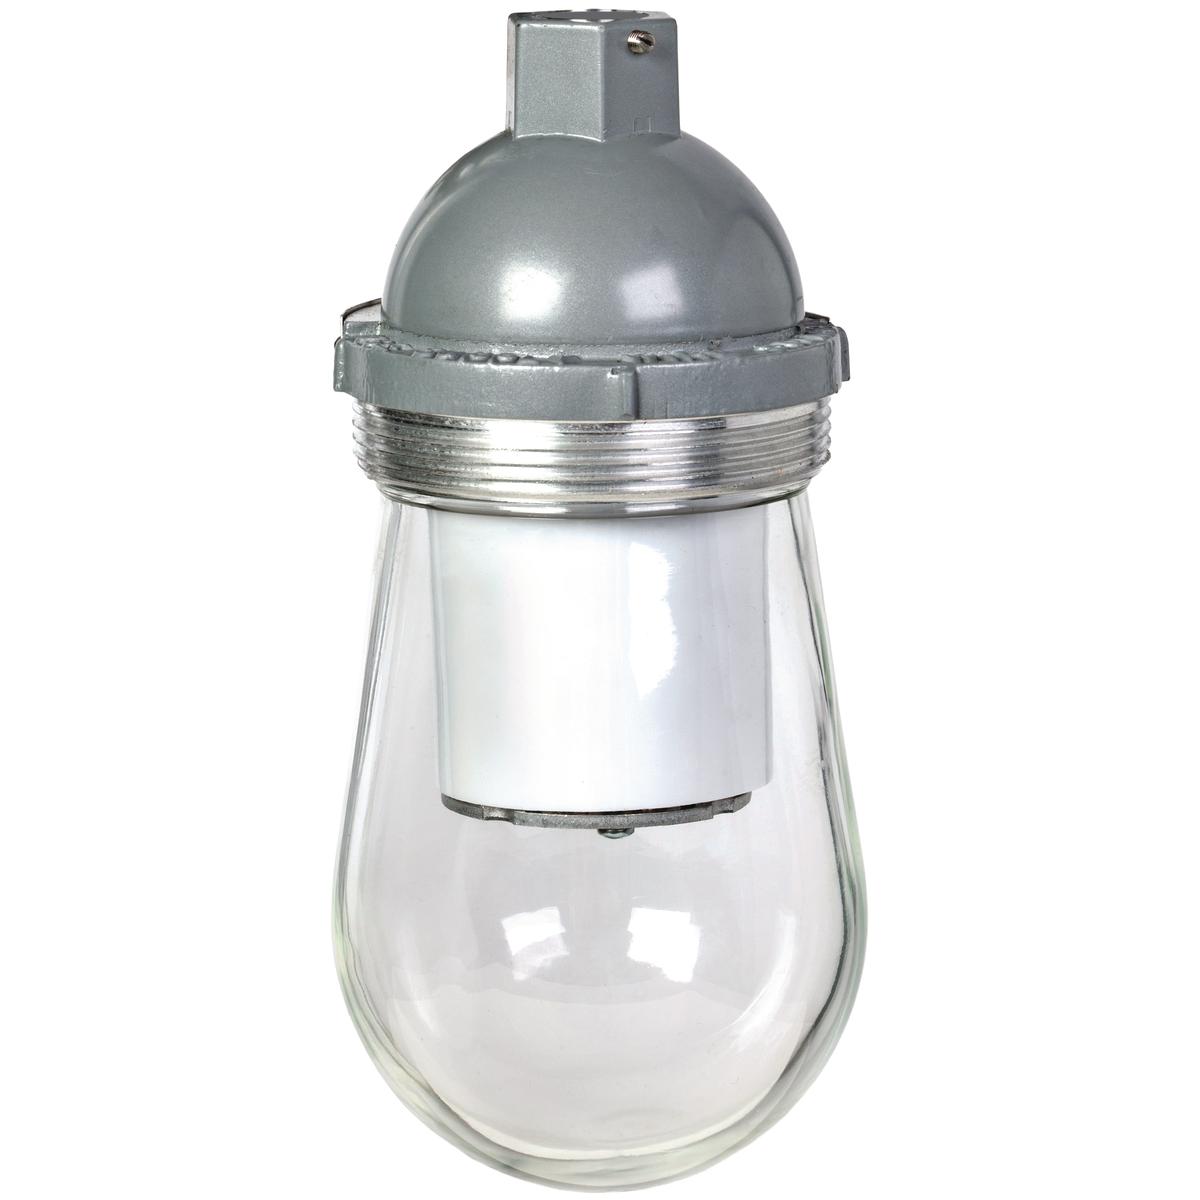 Hubbell DVL1330A2G The DVL Series is a Dust Tight/ Utility fixture using energy efficient LED's. This fixture is made with a cast copper-free aluminum housing and mount that is  suitable for harsh and hazardous environments. With the design of this fixtures internal heat si